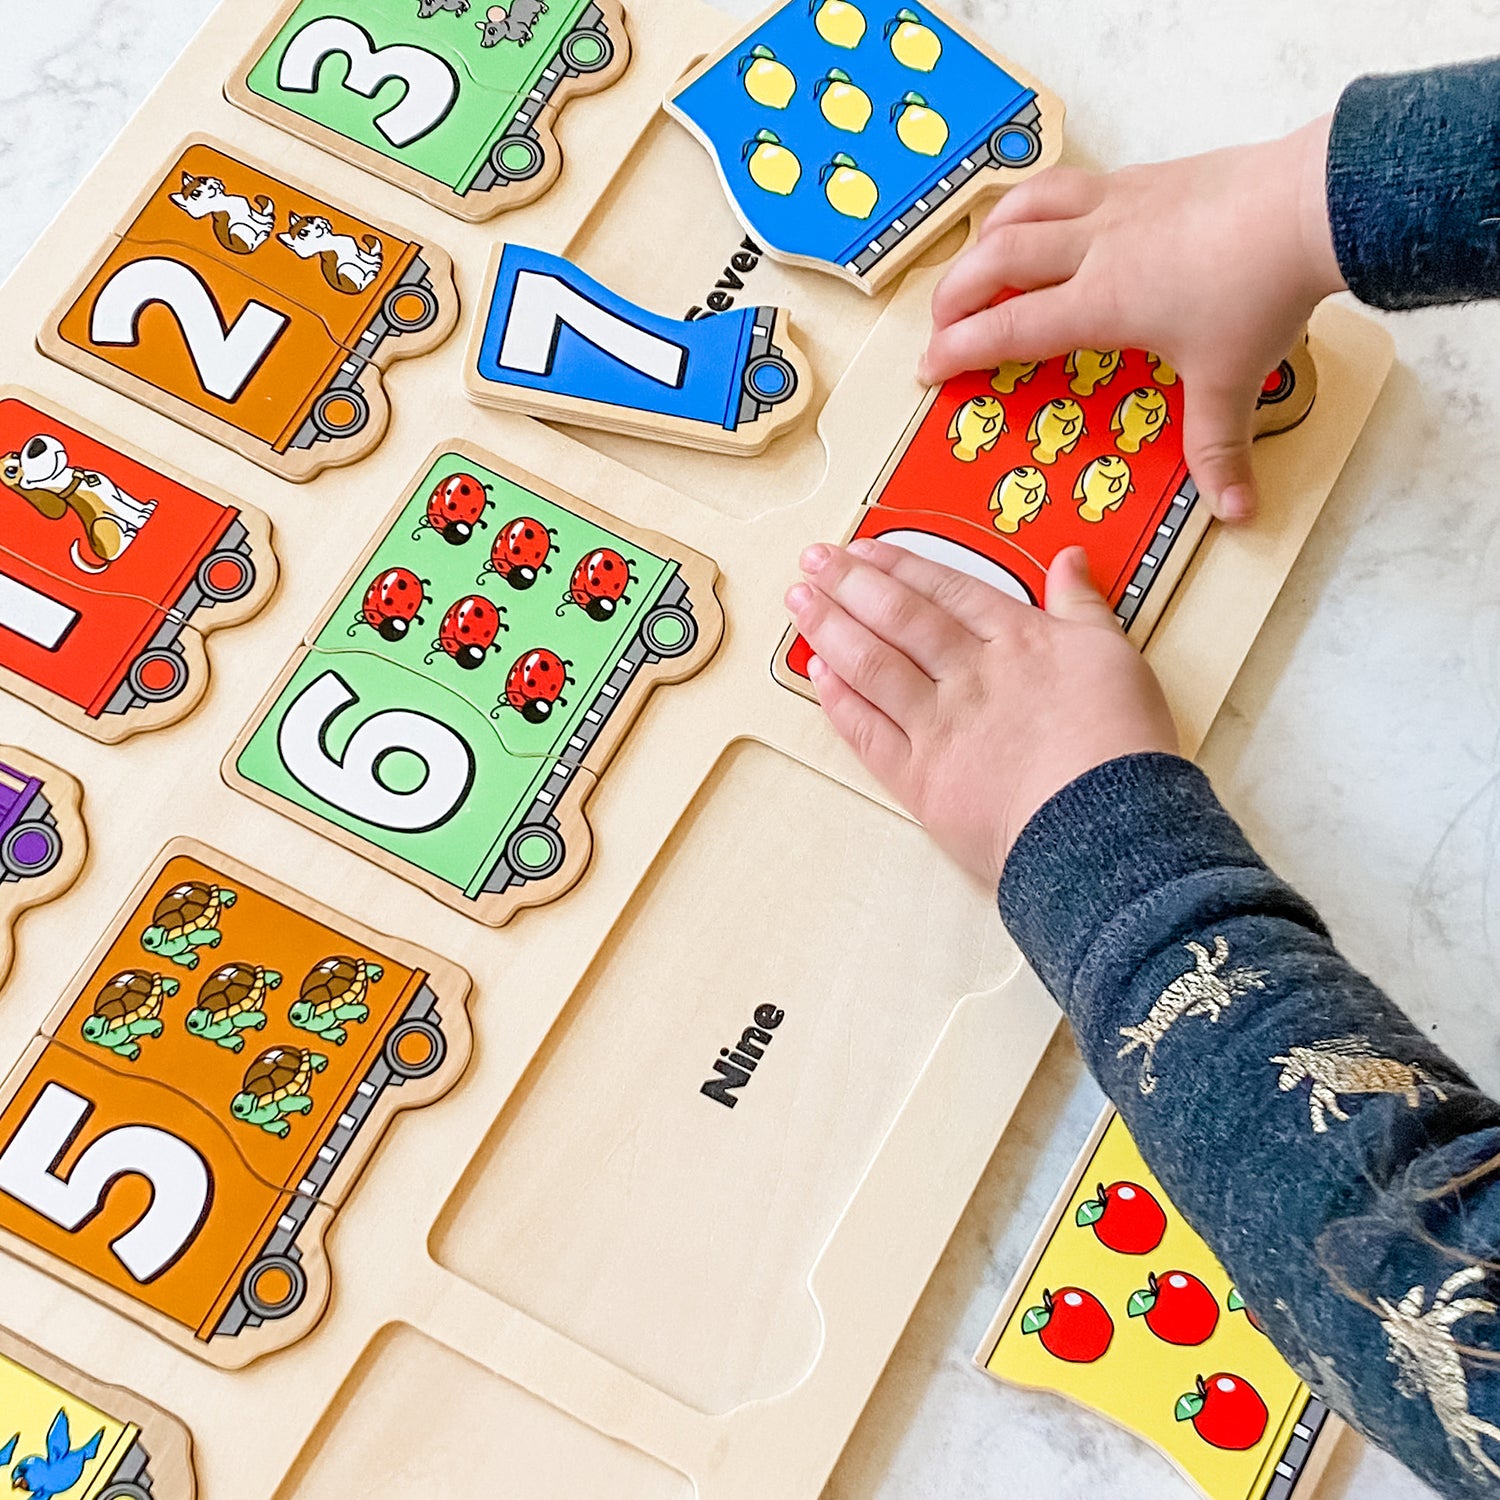 Tibbar's Little Hands, Big Smiles by SimplyFun is a set of three puzzles focusing on shapes, colors, lowercase and uppercase letters, and counting.